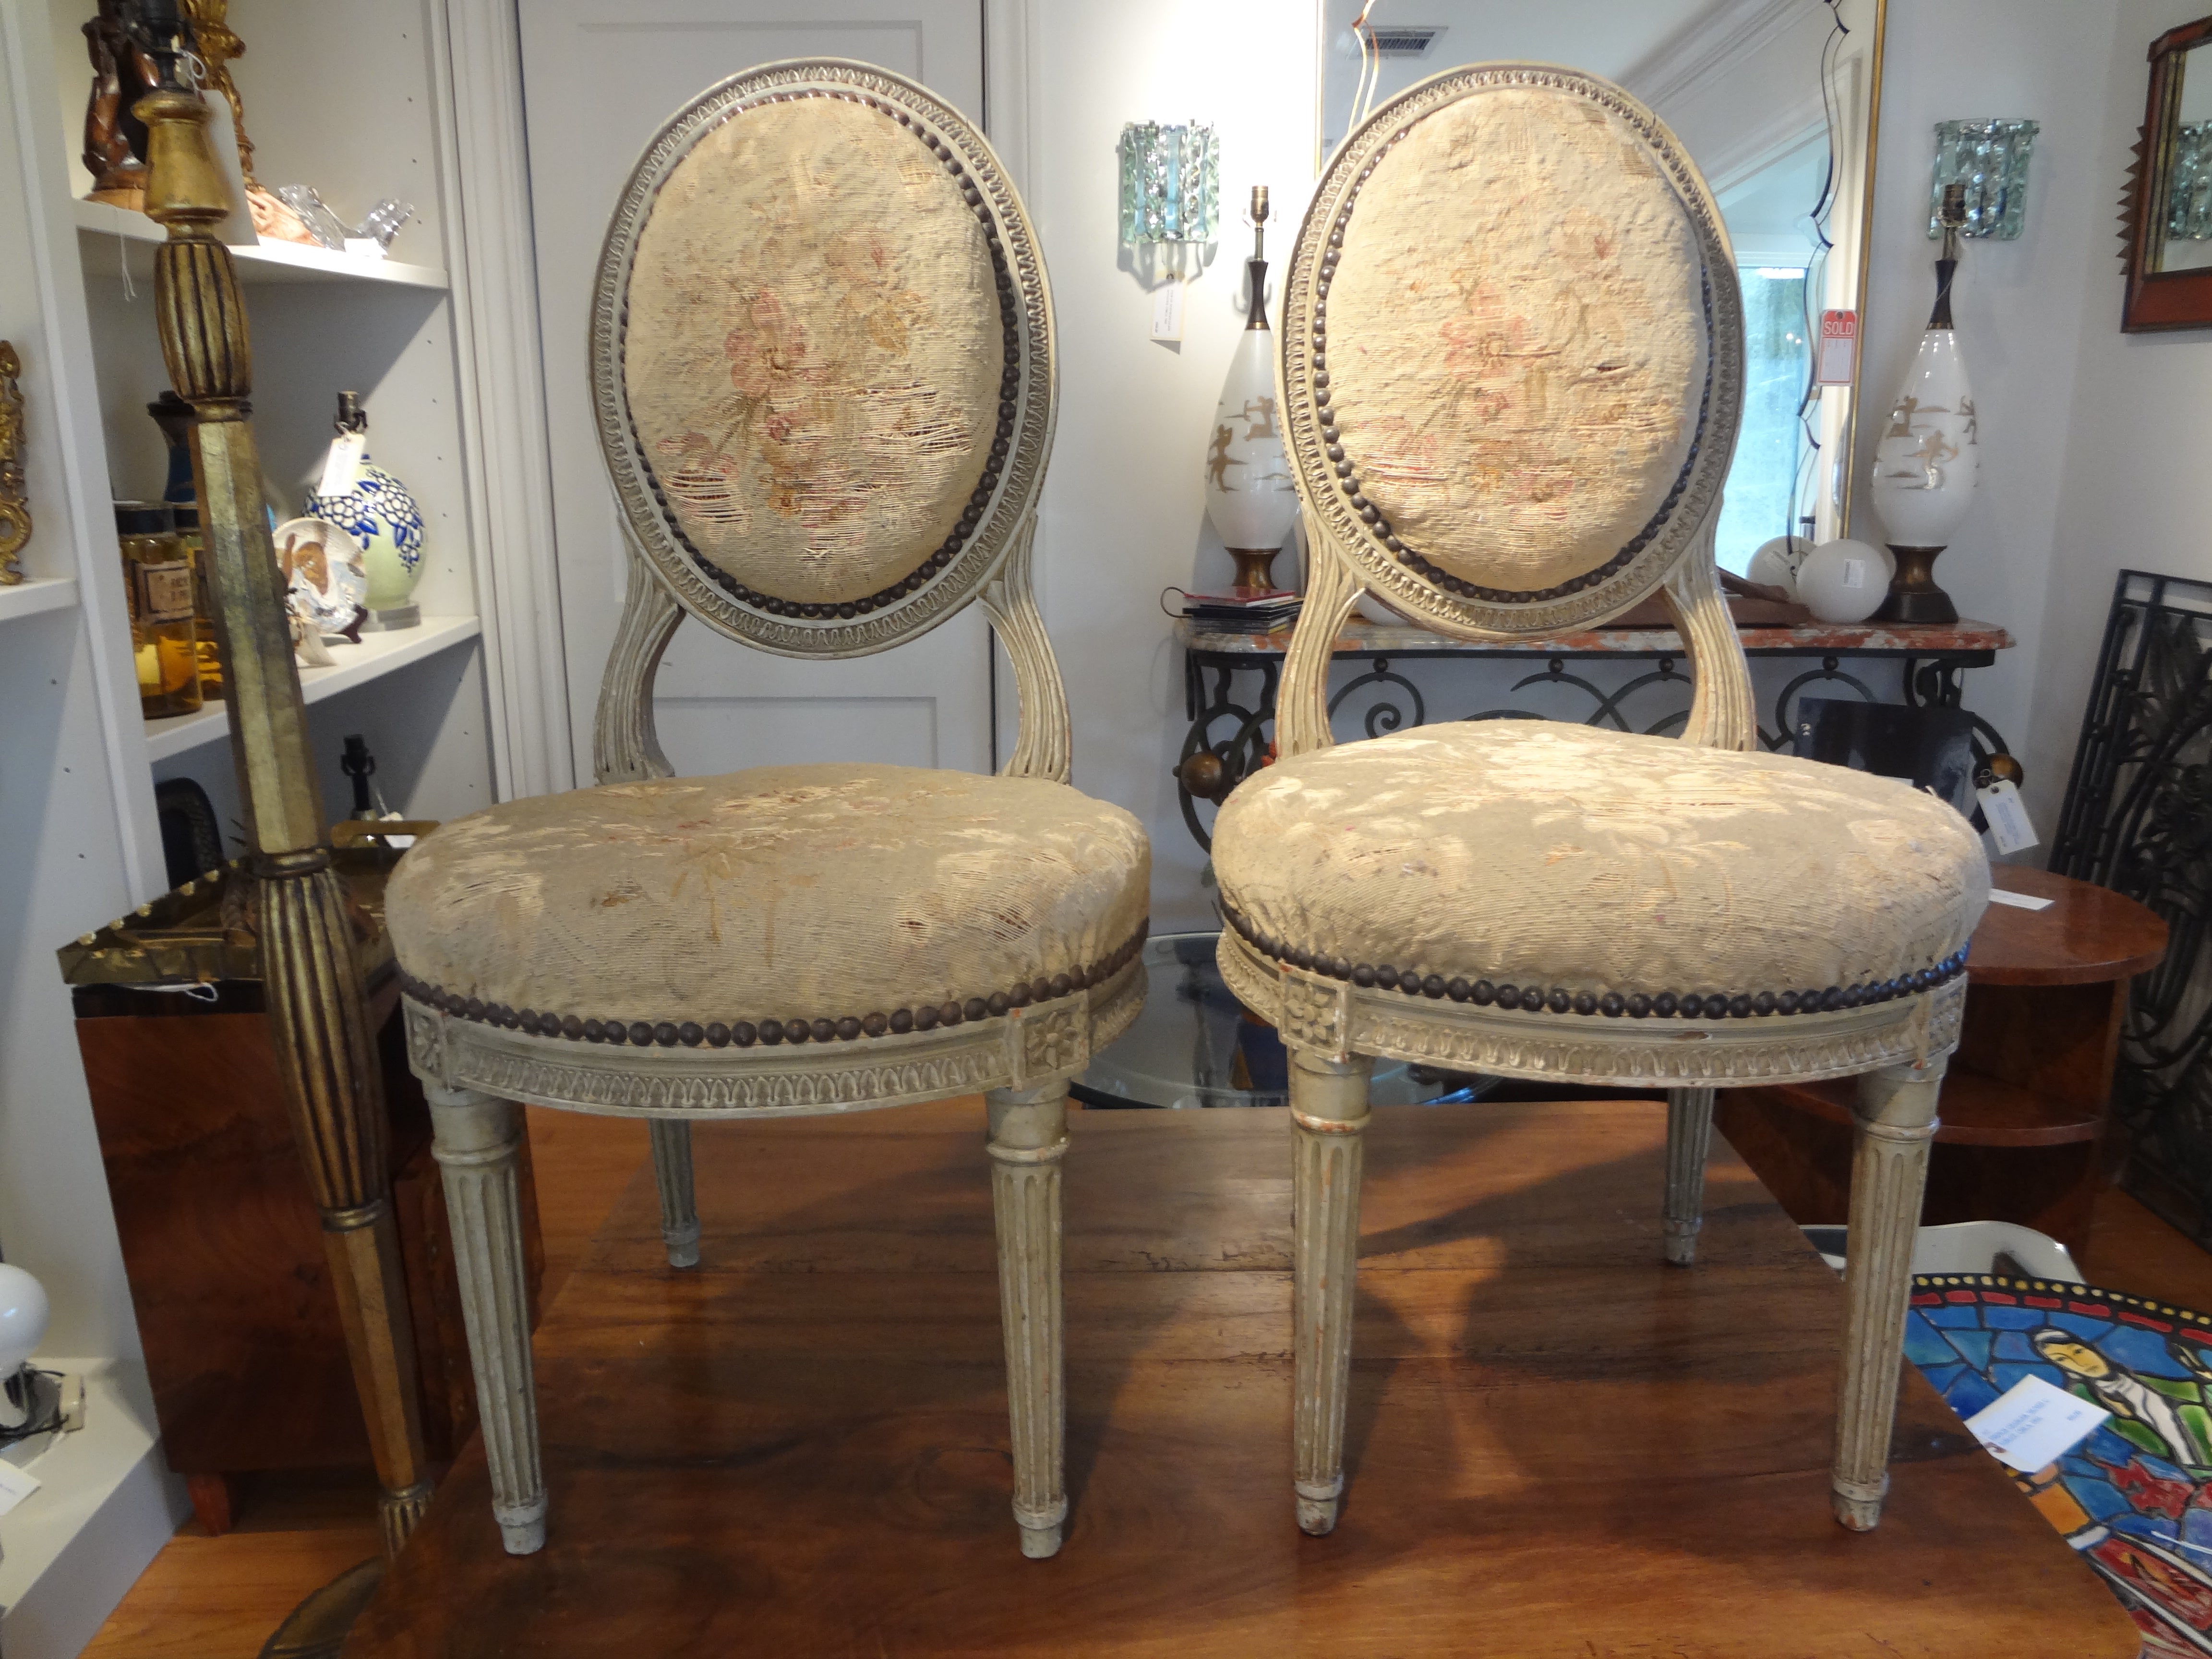 PAIR OF 19TH CENTURY FRENCH LOUIS XVI STYLE CHILD'S CHAIRS